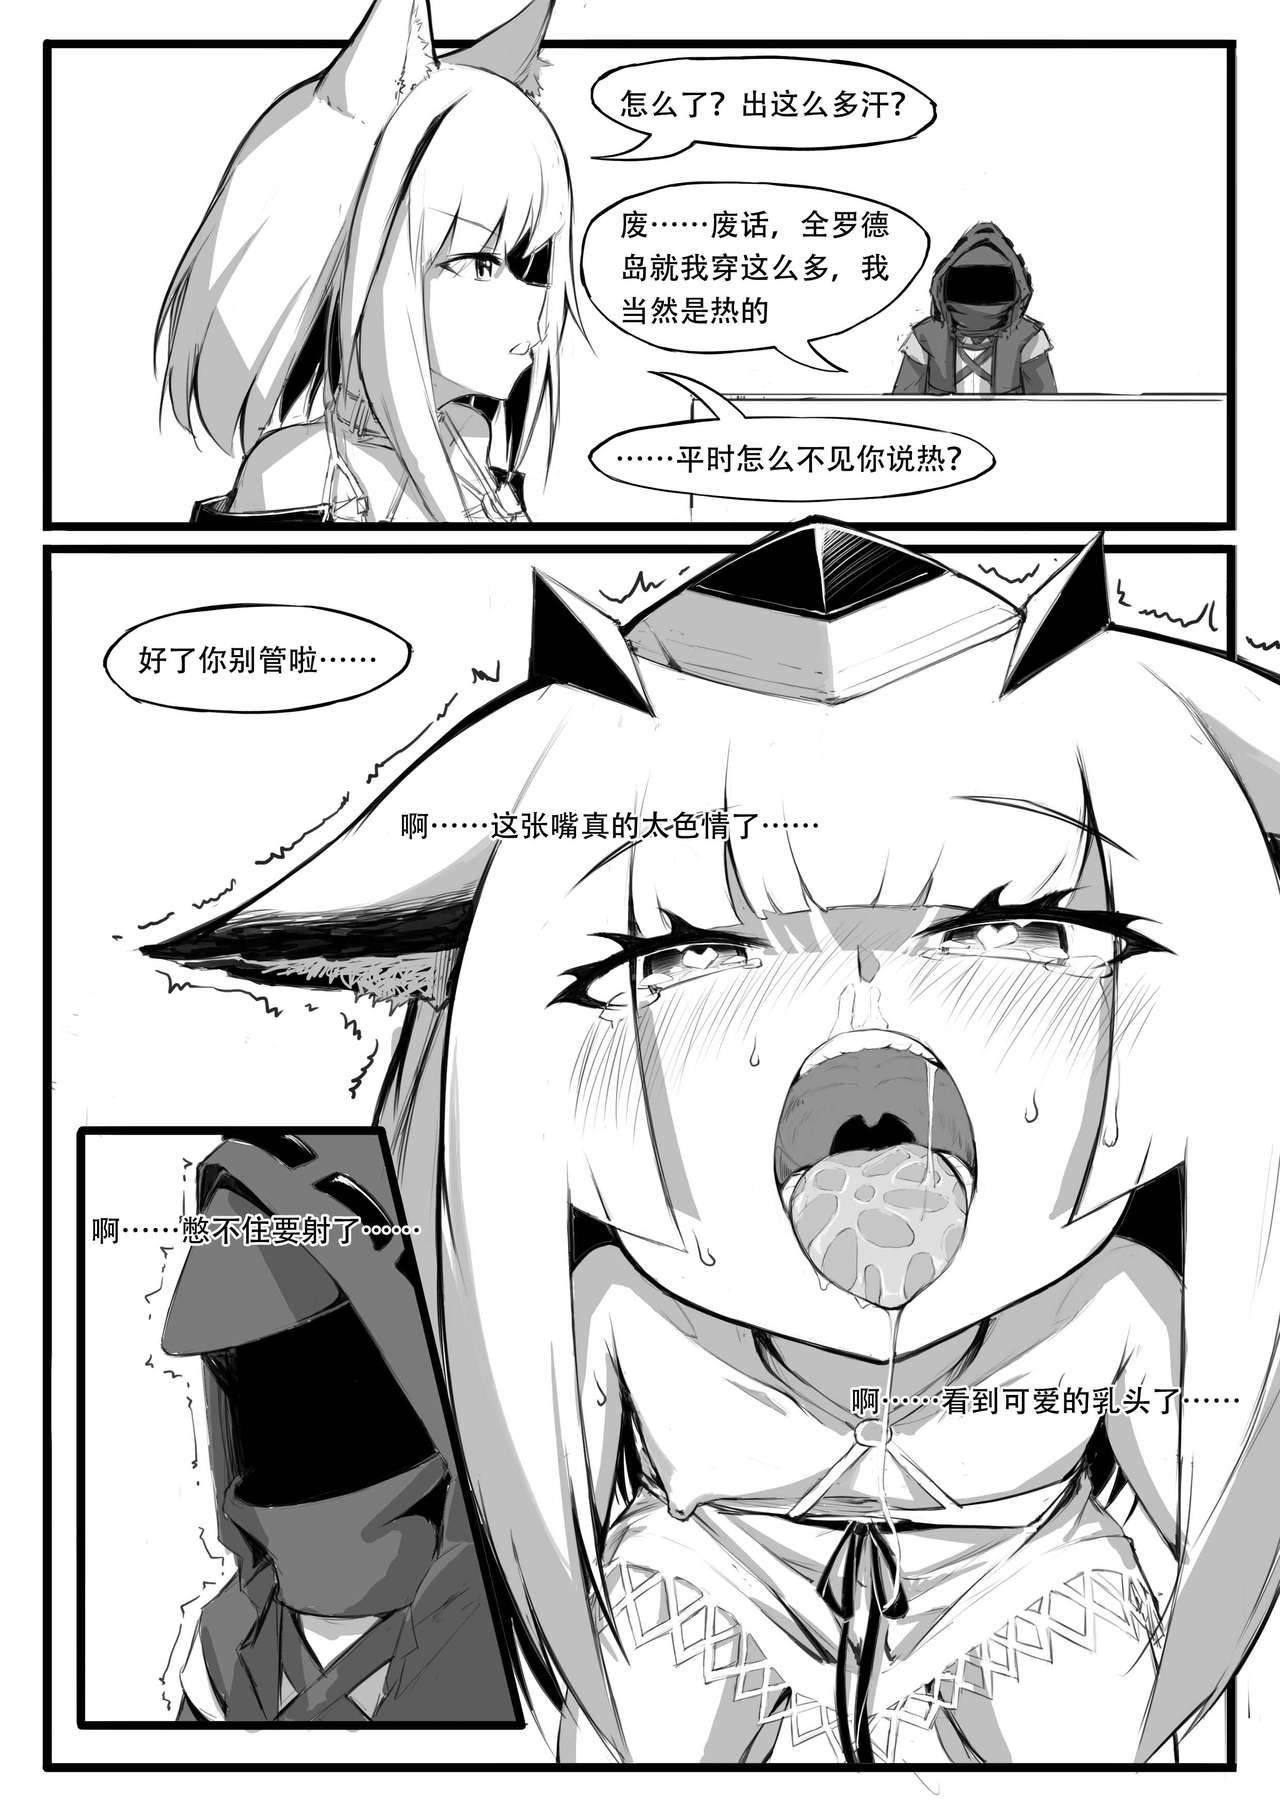 [saluky] 关于白面鸮变成了幼女这件事 (Arknights) [Chinese] page 15 full